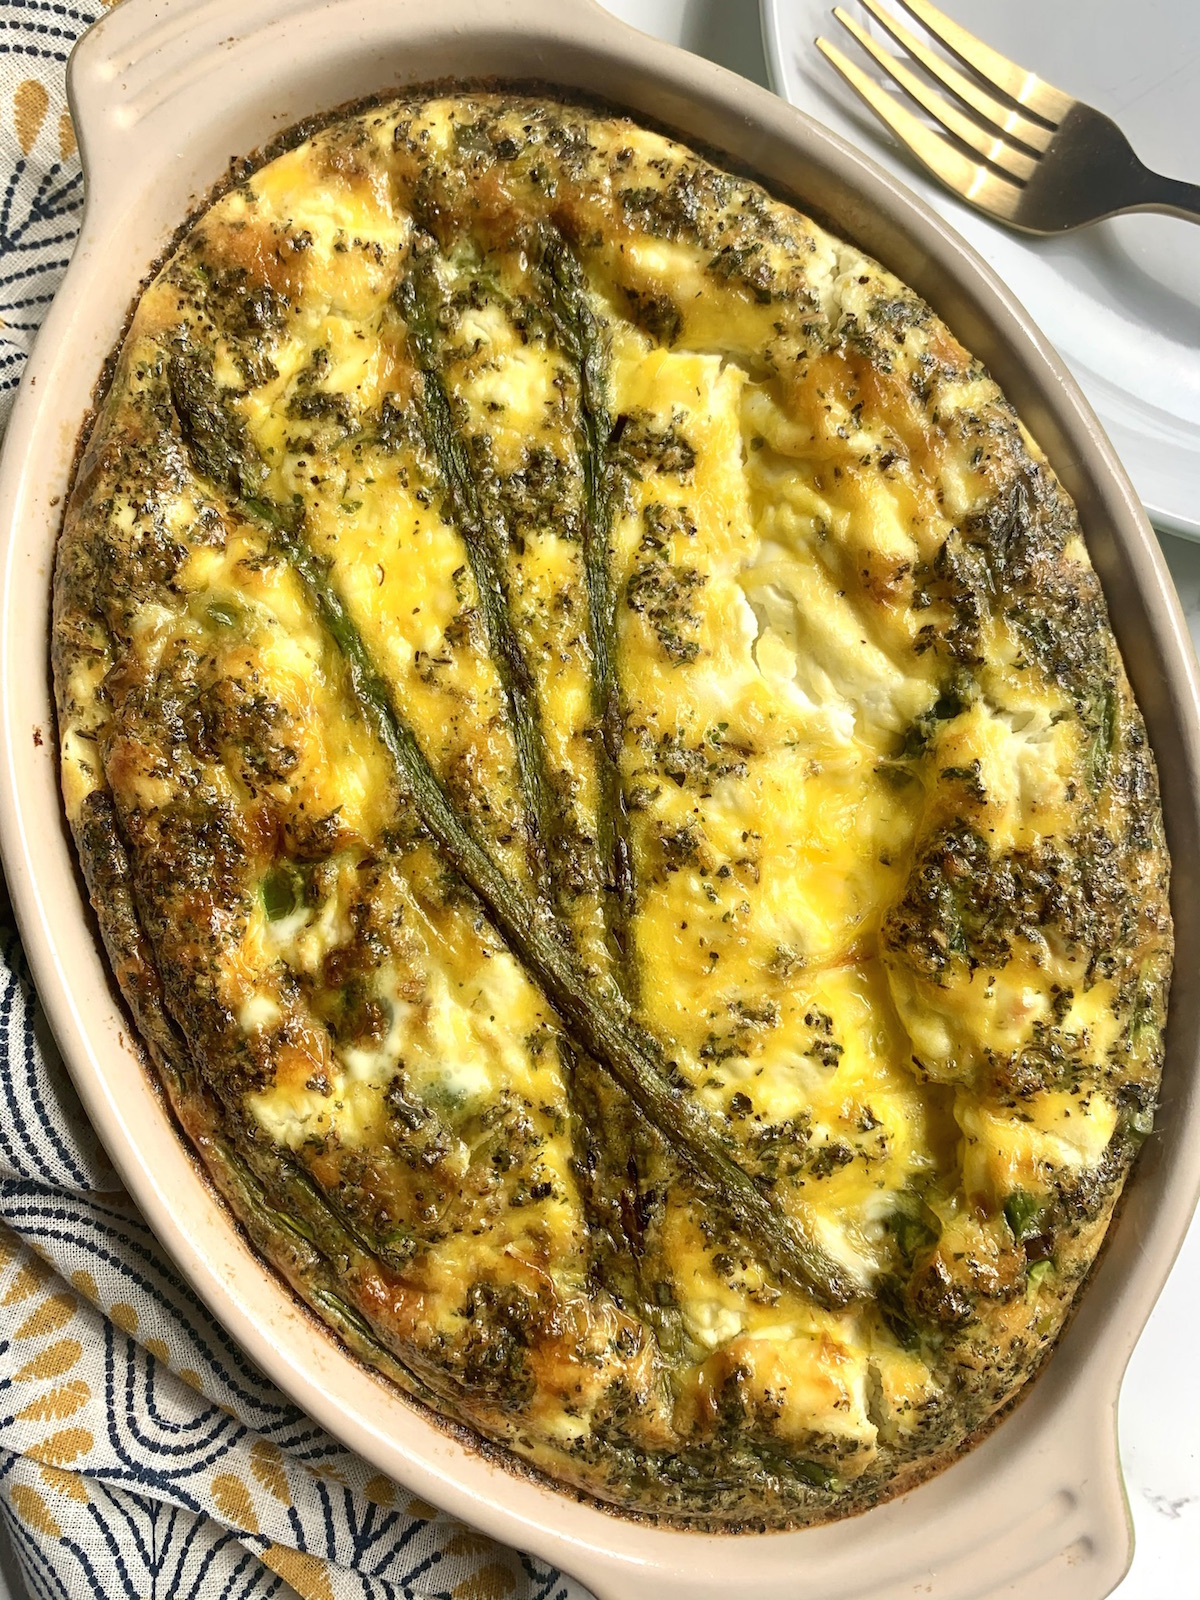 Baked asparagus, leek and goat cheese frittata in an oval baking dish with a yellow and gray napkin and white plate in the background